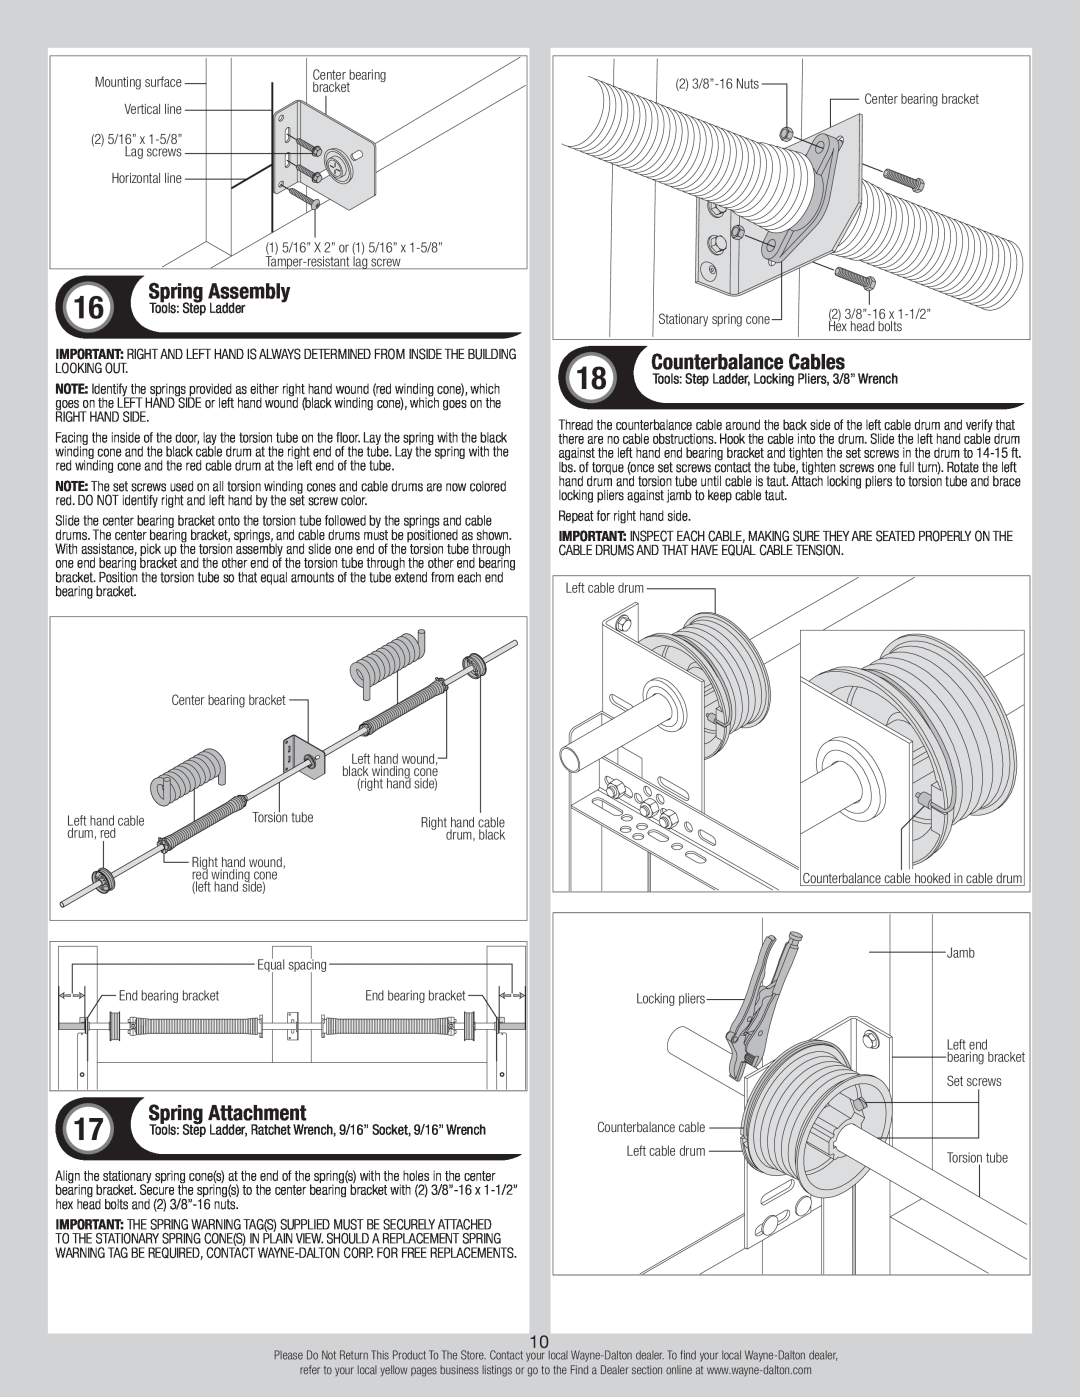 Wayne-Dalton 8300, 8500 installation instructions Counterbalance Cables, Spring Attachment, Spring Assembly 